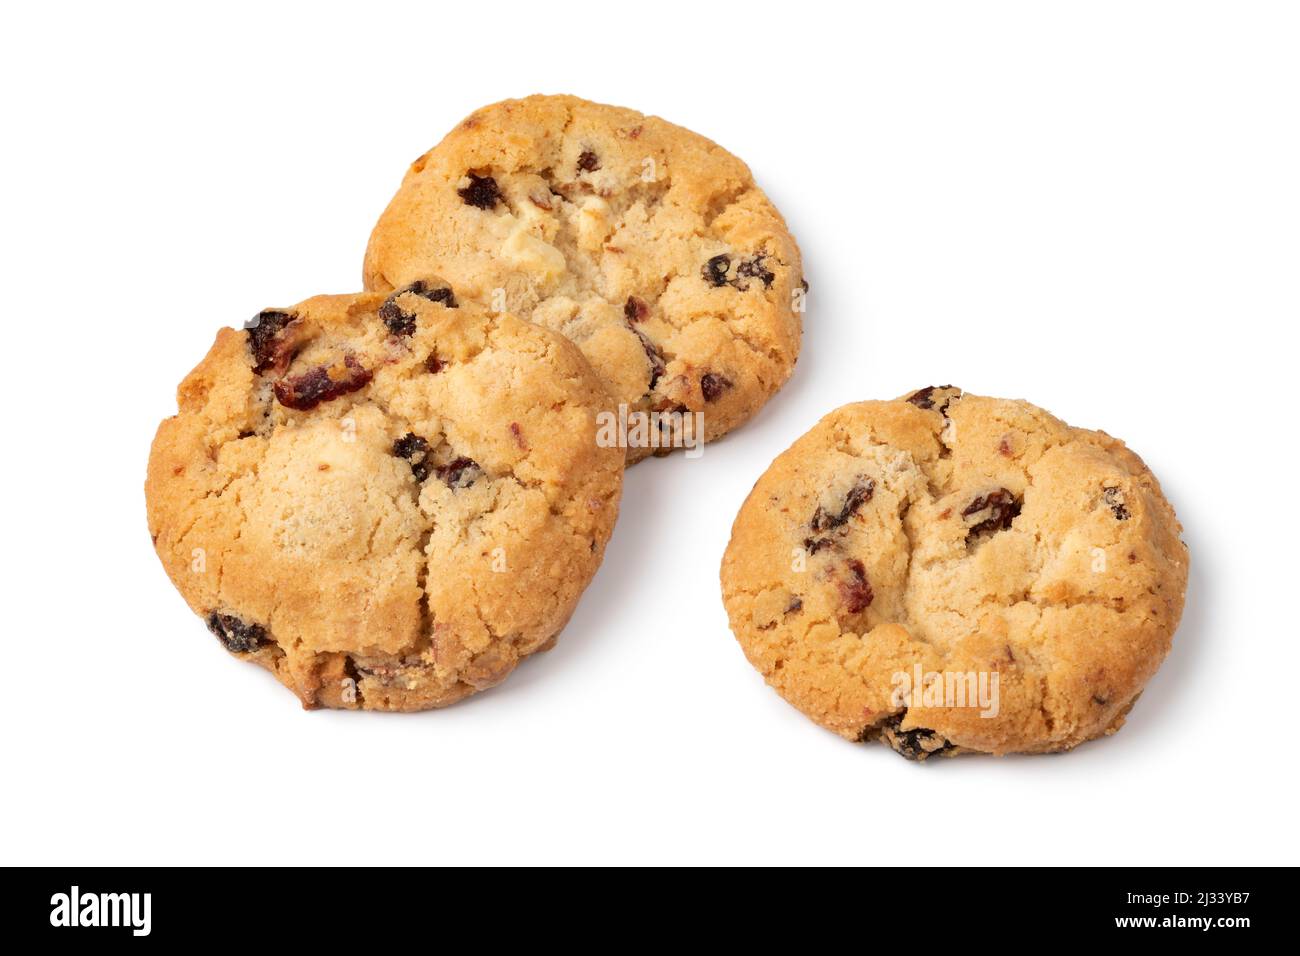 Heap of fresh baked chocolate cranberry cookie close up isolated on white background Stock Photo